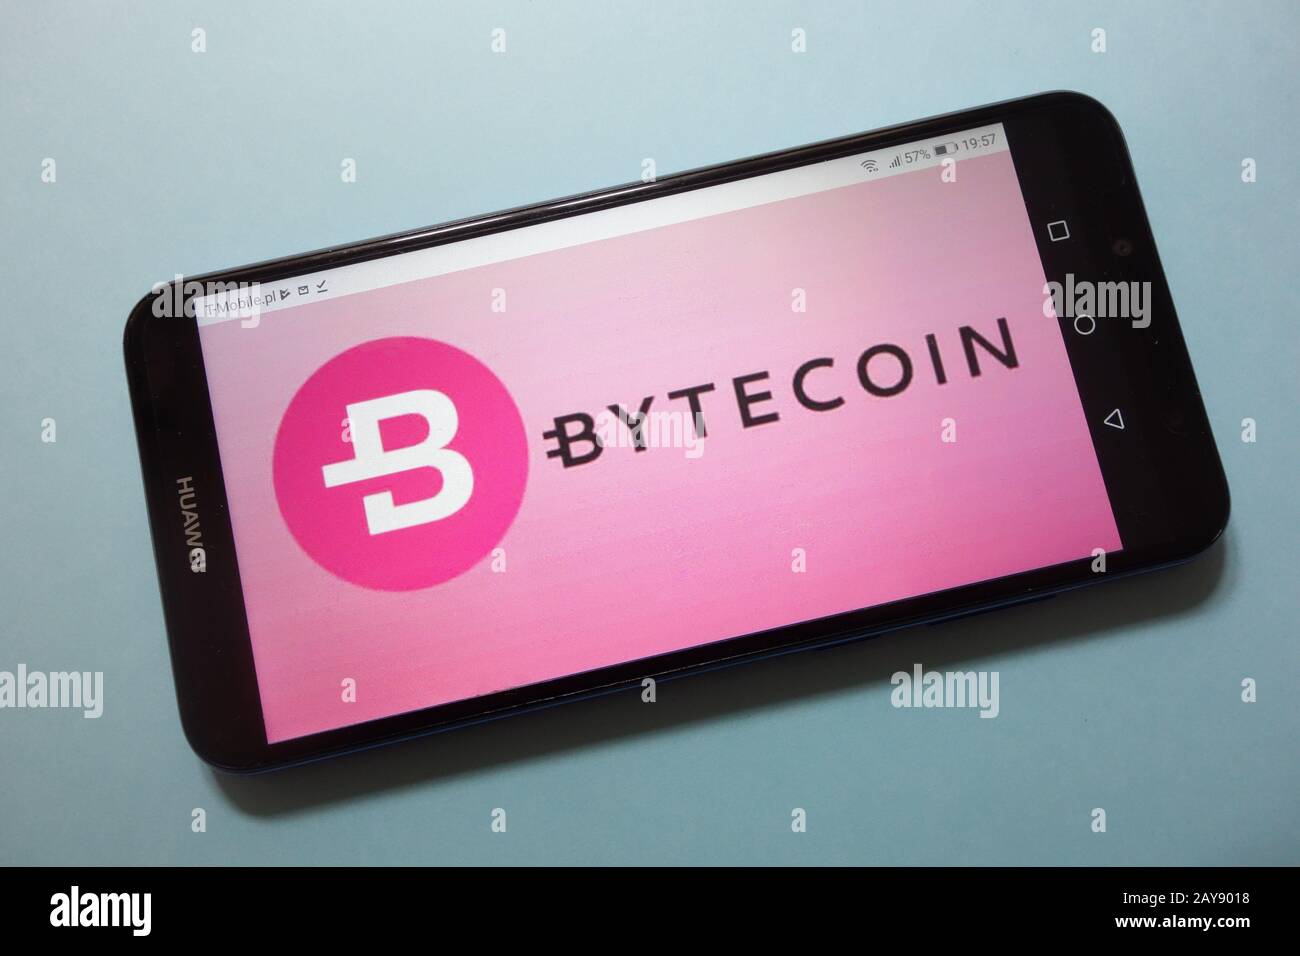 Bytecoin (BCN) cryptocurrency logo displayed on smartphone Stock Photo